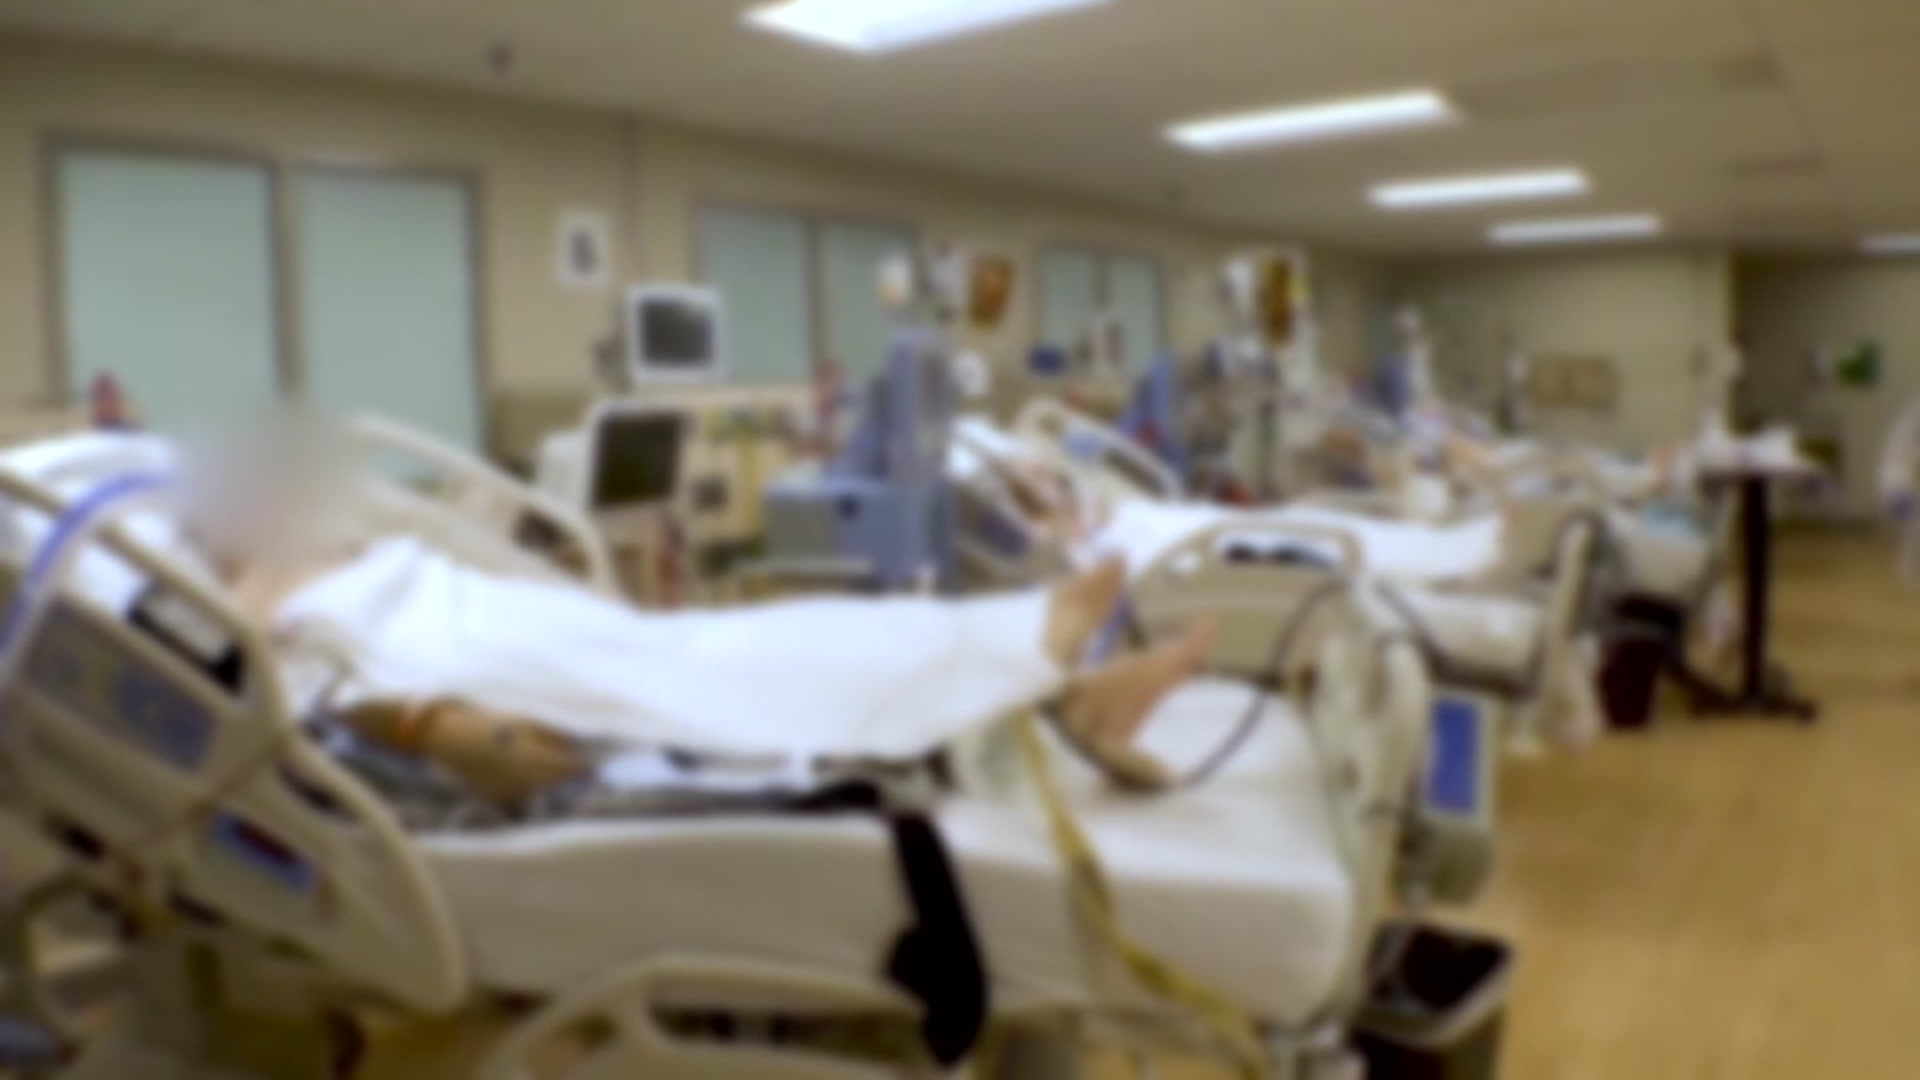 COVID In Minnesota: Beds Not Available For ER Patients As Hospital Capacity Pushed To Limits